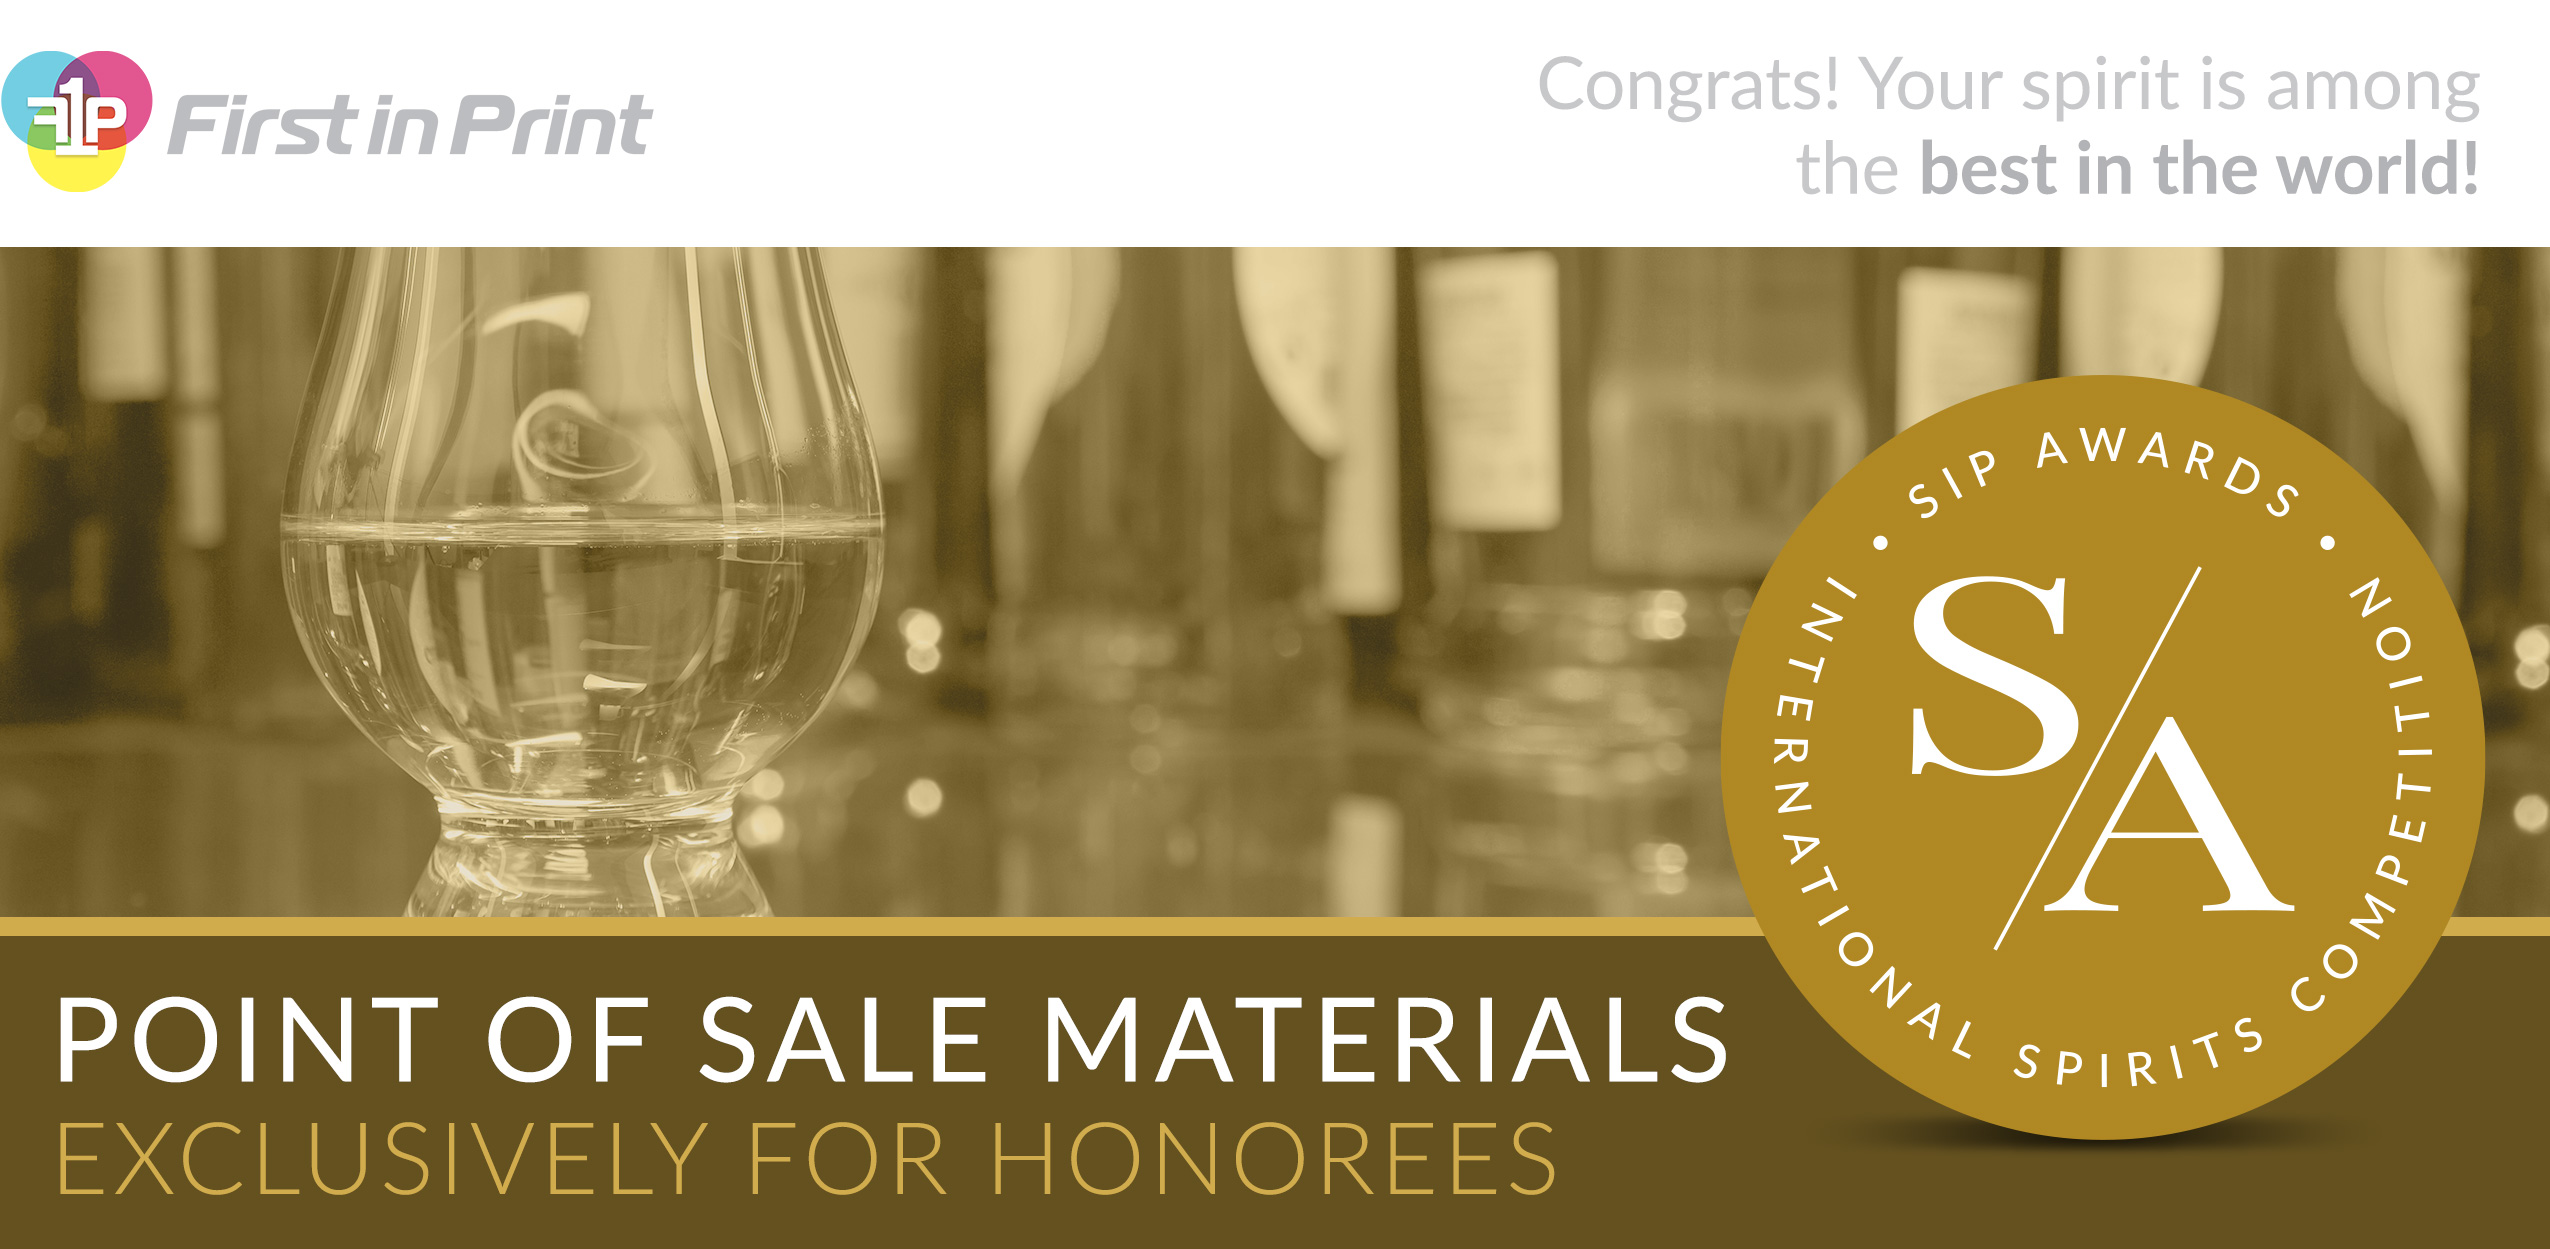 Point-of-Sale Materials for Winners of Sip Awards